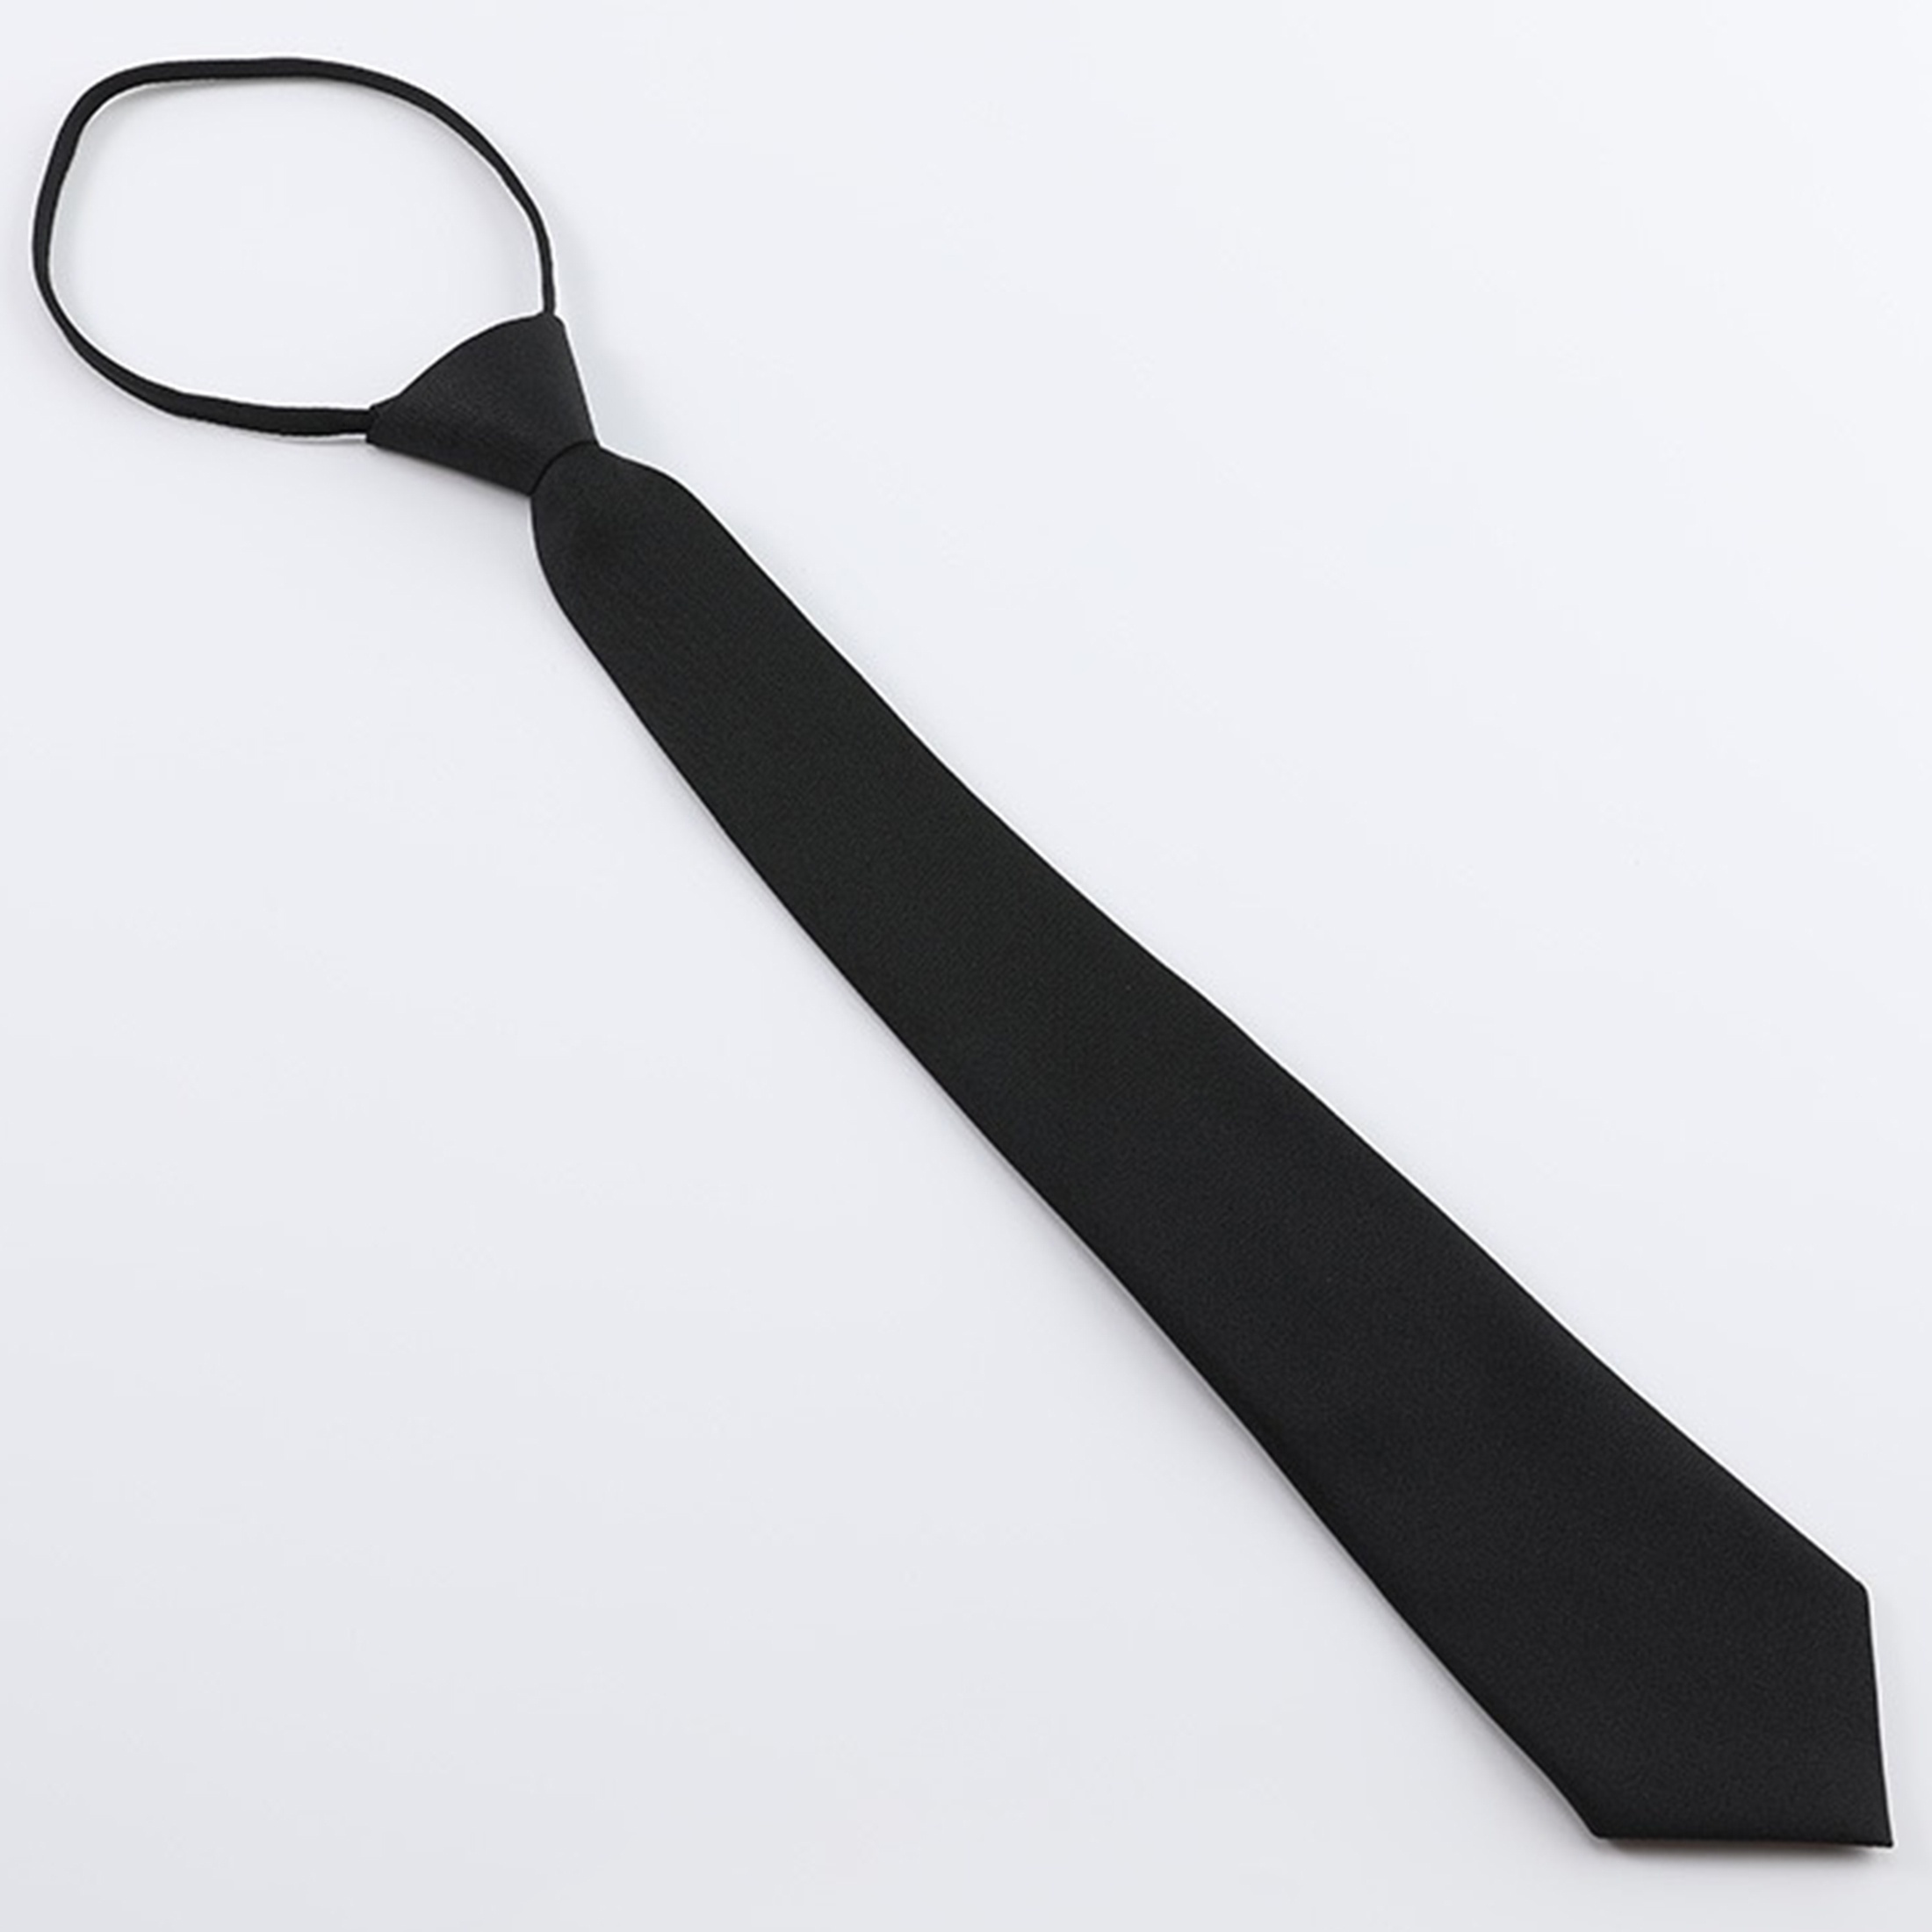 

1pc Unisex Black Knot-free Adjustable Long Narrow Tie, For Matching Suit Formal, Business Wedding Party Accessories